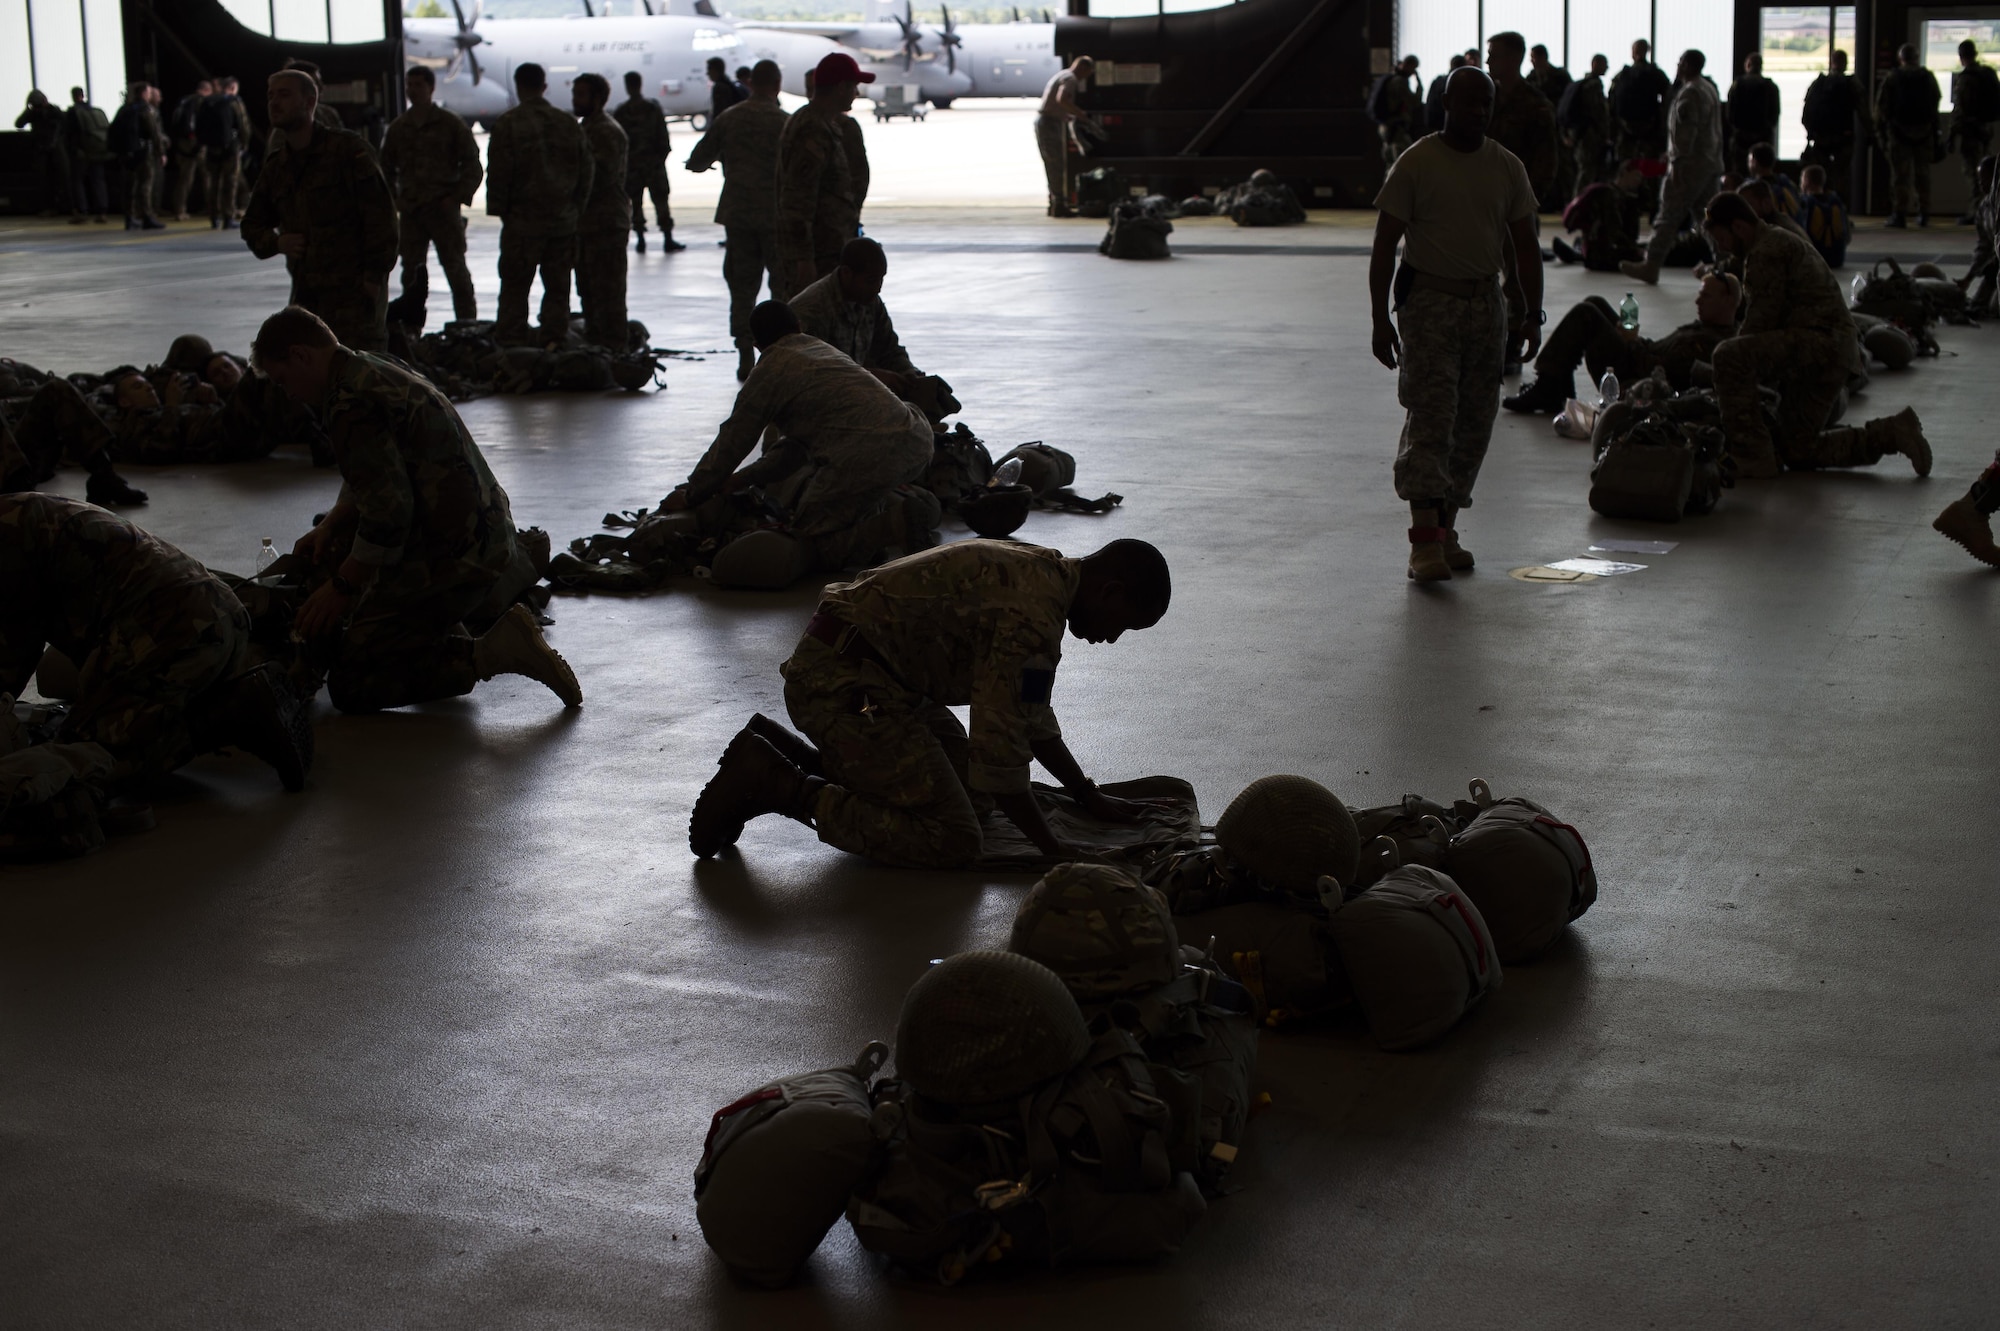 Service members pack parachutes prior to jumping during International Jump Week, July 8, 2015, at Ramstein Air Base, Germany. International Jump Week is an annual event providing paratroopers the opportunity to practice high altitude, low opening and static line jumps. Pilots, loadmasters and parachute riggers were also able to train during the week. Supporting units at the drop zone included U.S. Air Force and Army personnel, air traffic controllers, and medical teams. (U.S. Air Force photo/Senior Airman Damon Kasberg)